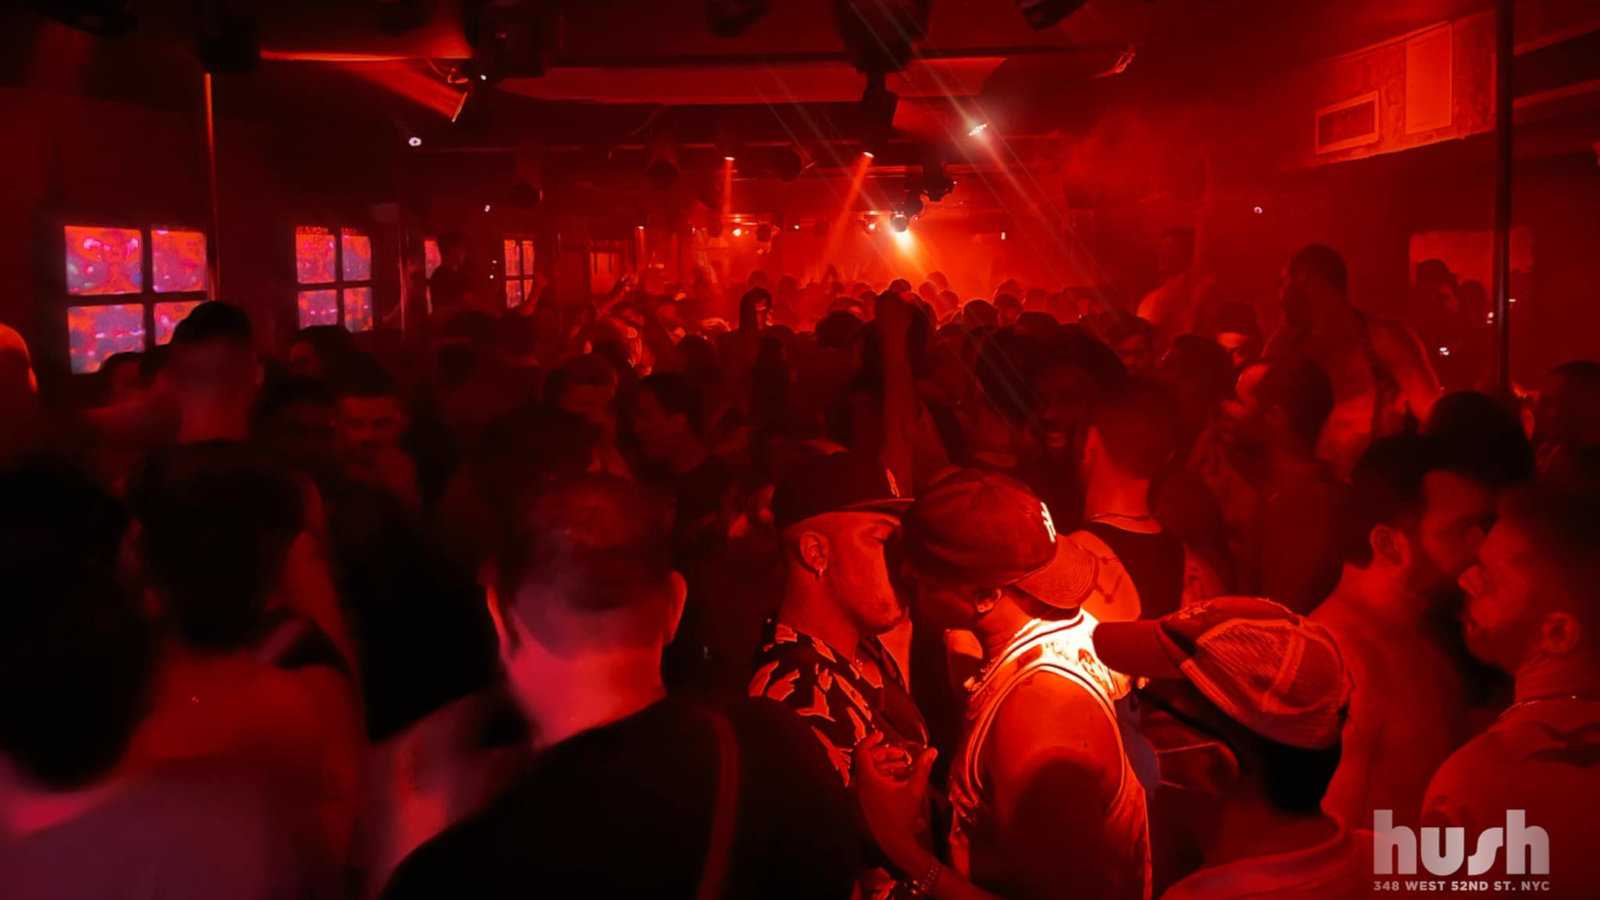 A crowded dance floor lit by red lights showing gay men dancing and kissing at HUSH gay bar in New York City.